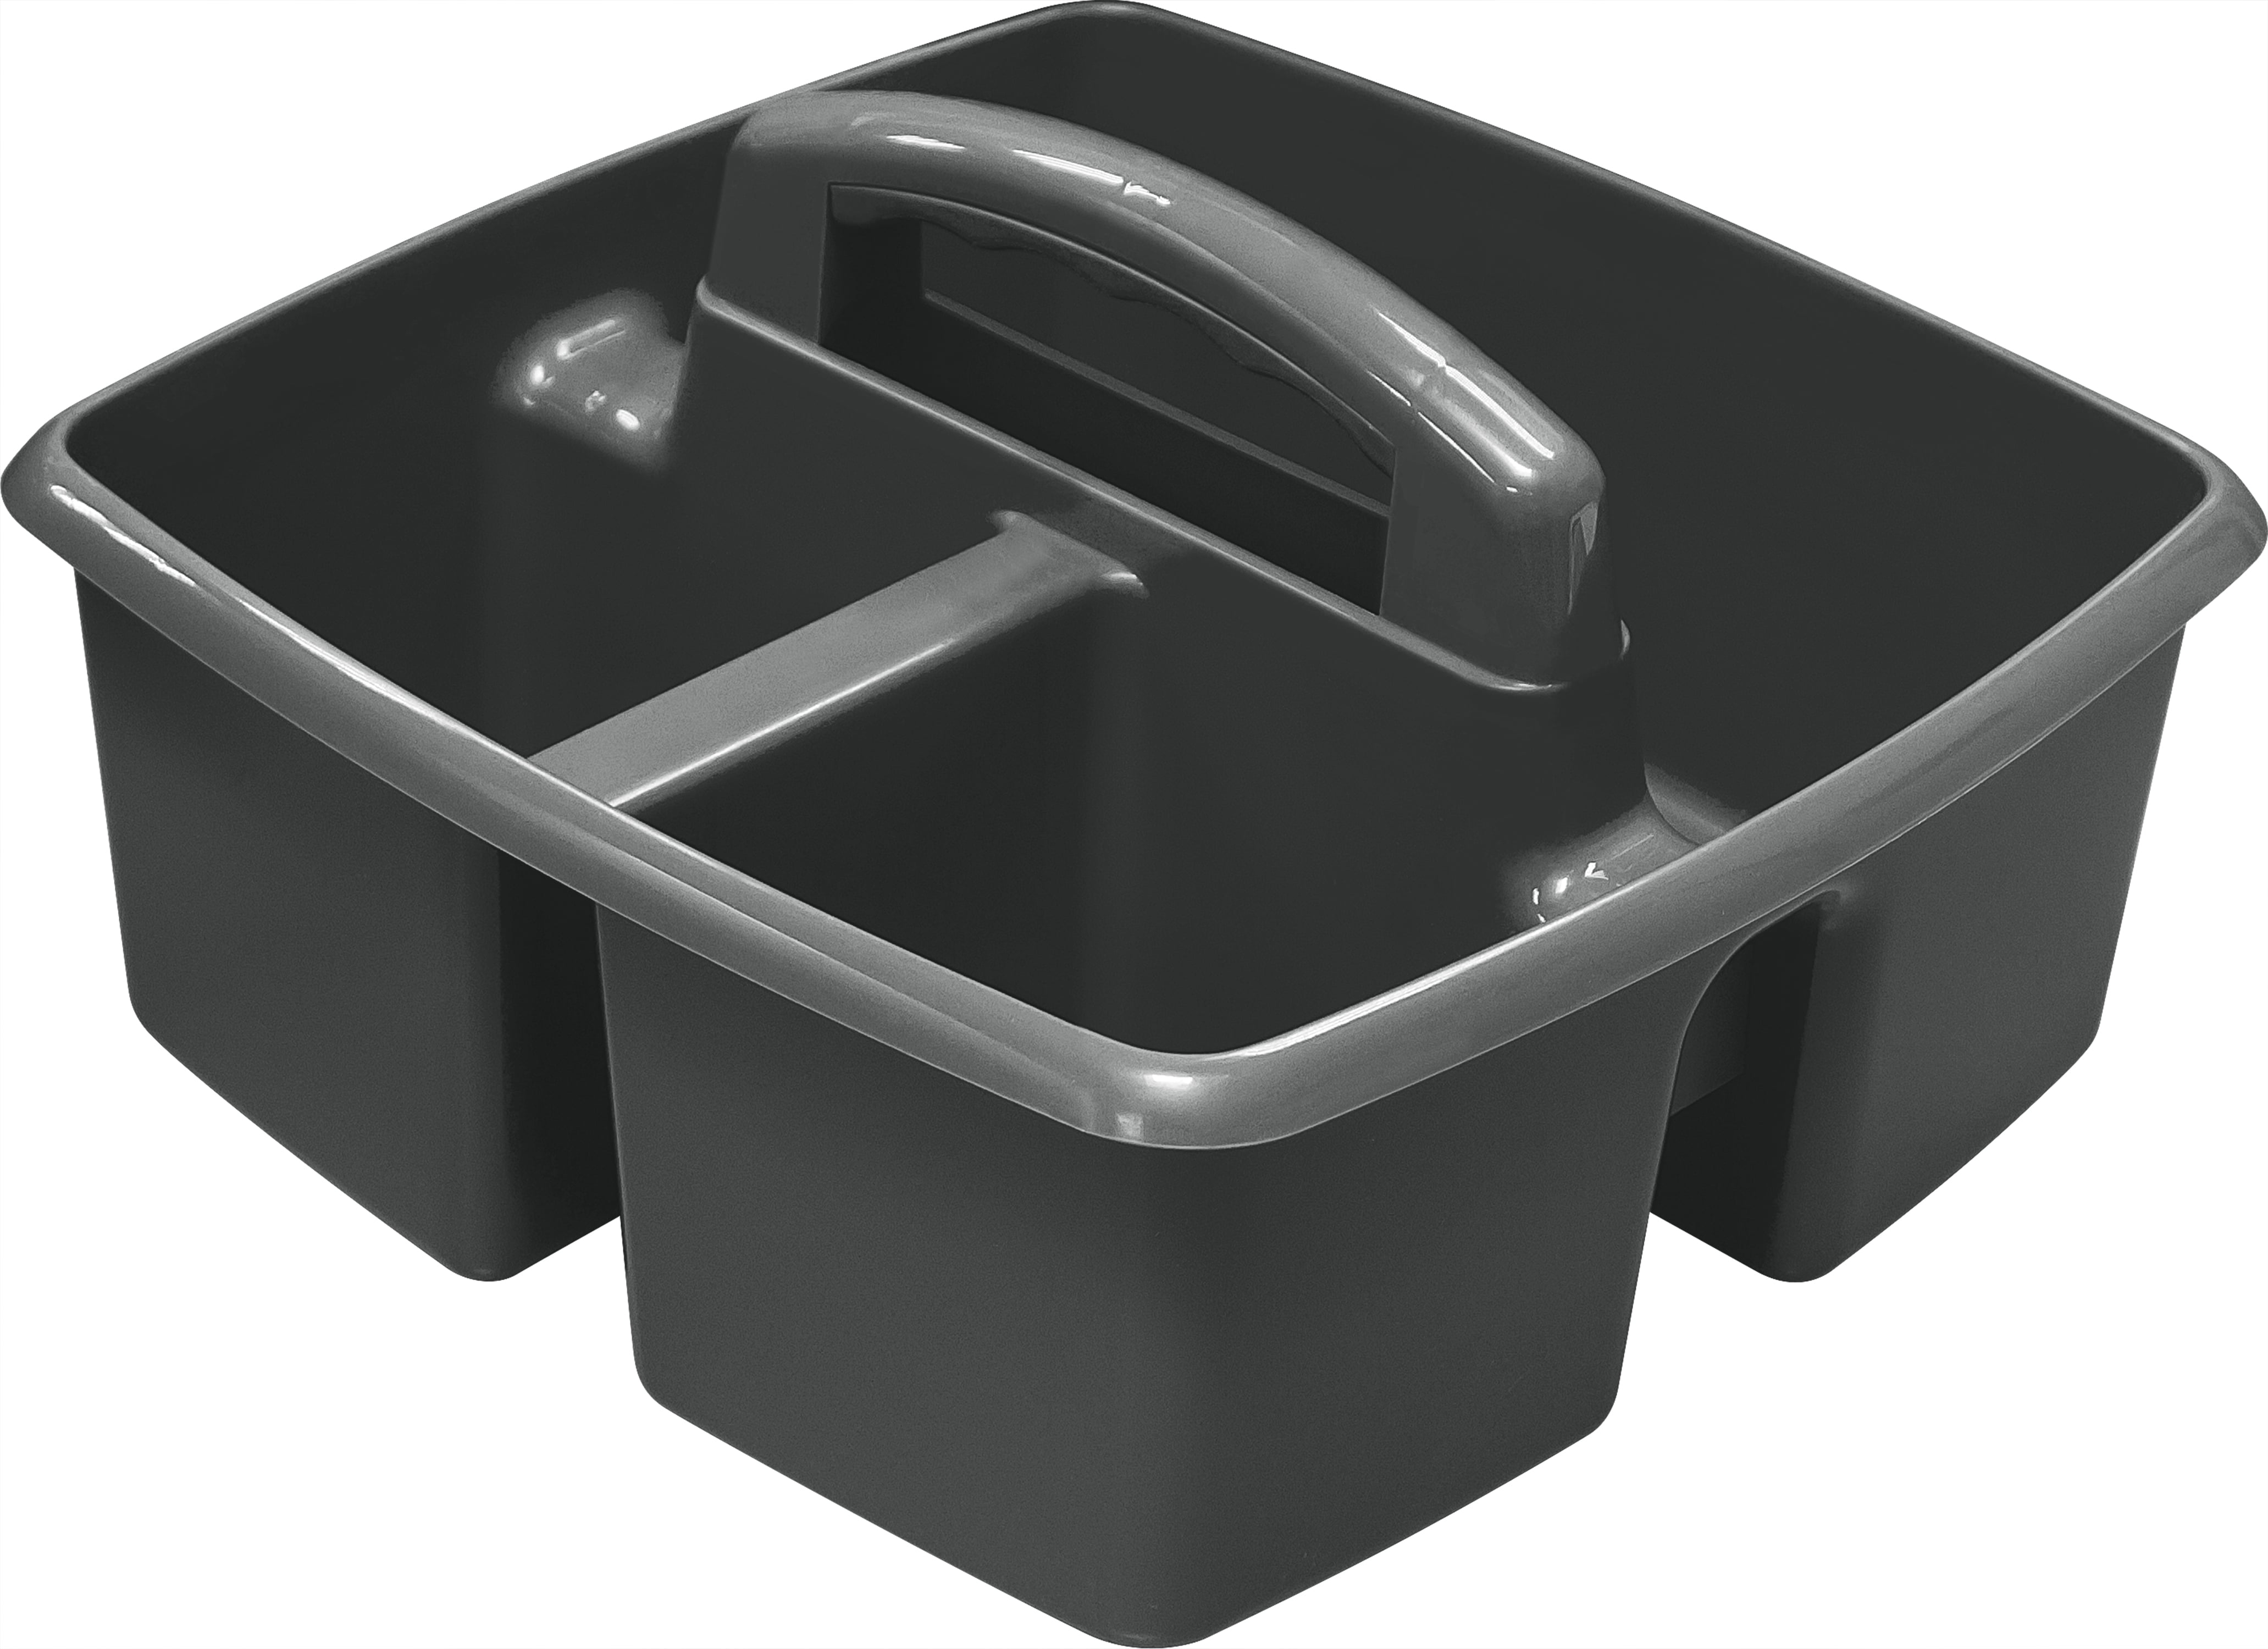 ART BIN - CRAFT CADDY BLACK GRAY - The Stationery Store & Authorized FedEx  Ship Centre